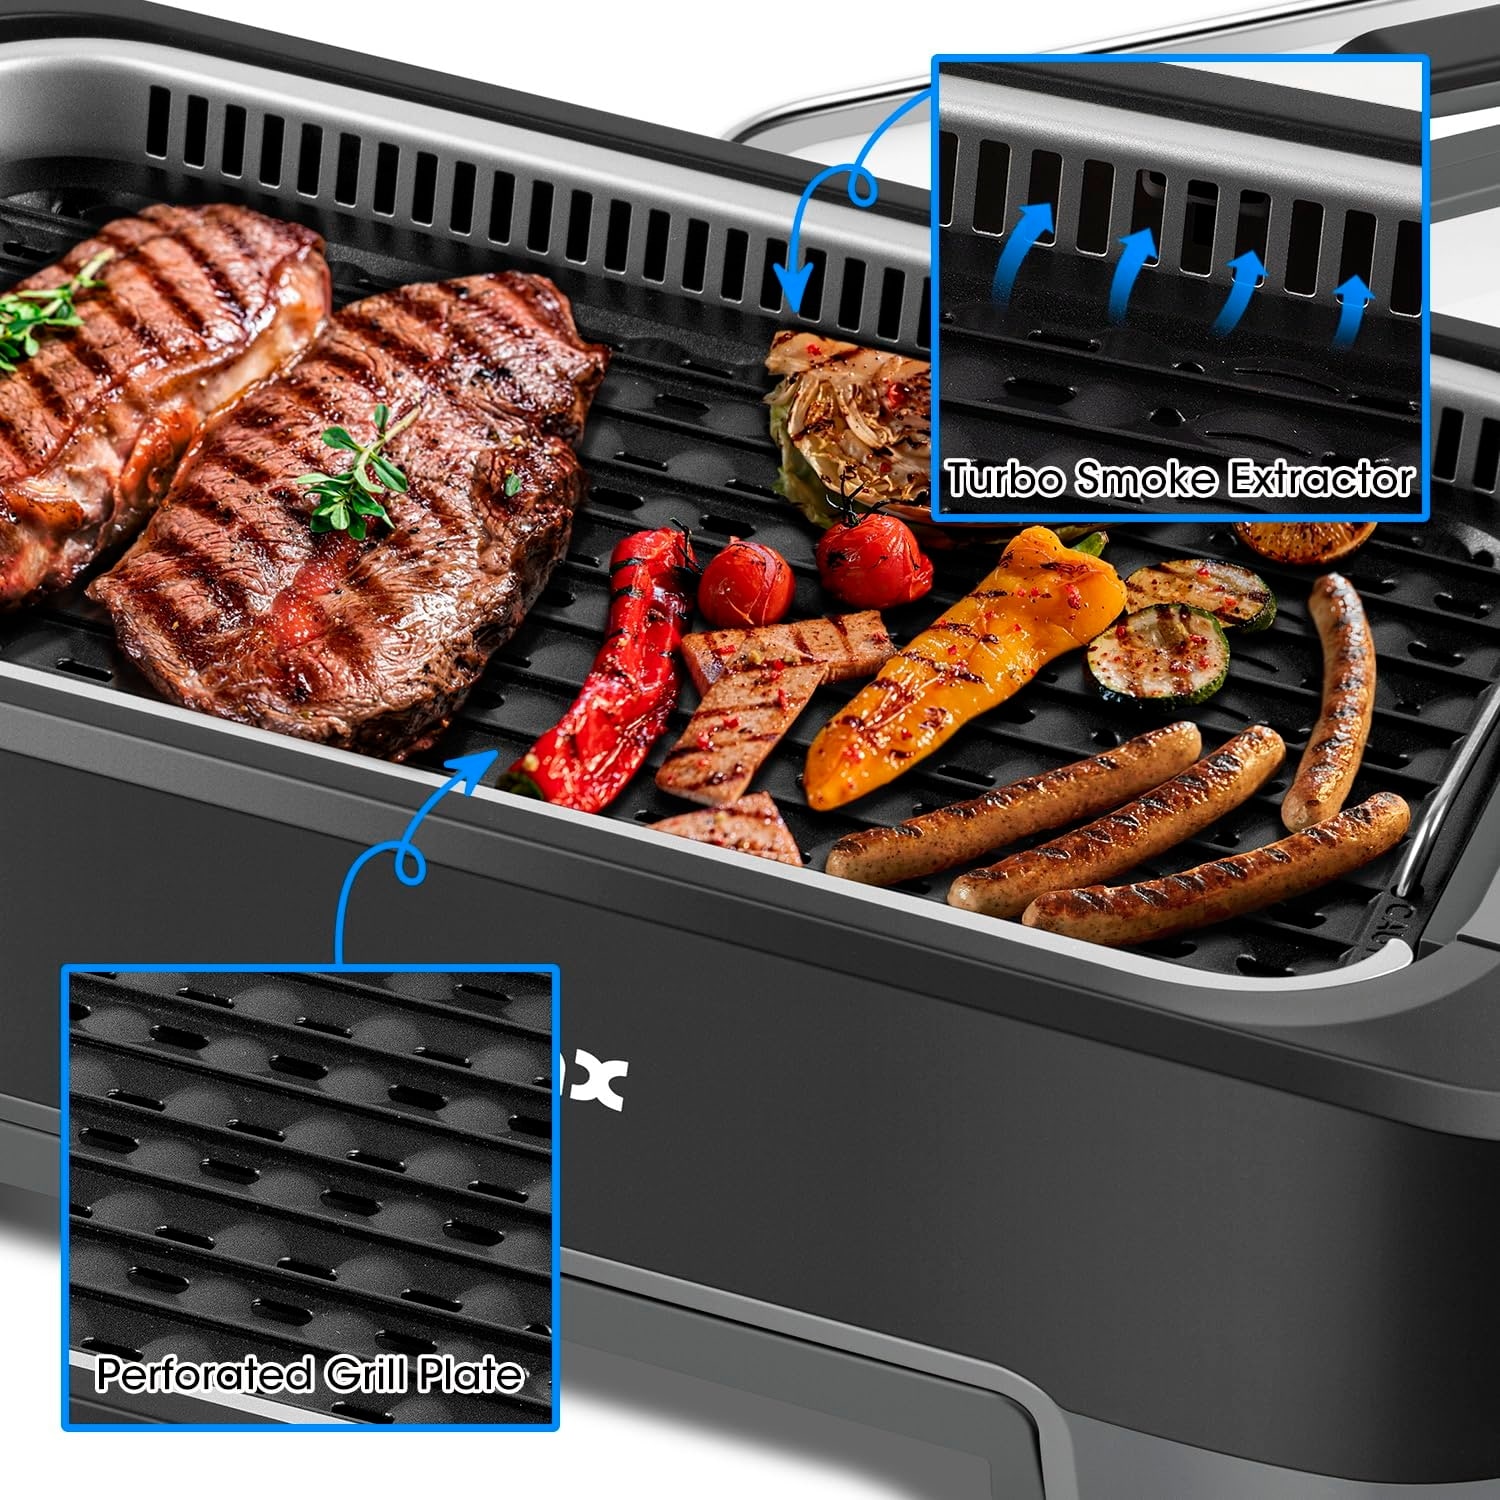  Indoor Grill, Smokeless Indoor Electric Grill & Griddle with  Turbo Smoke Extractor Technology, Non-stick Cooking Surfaces, Tempered  Glass Lid, 1500W Quick Heating, Great for Party: Home & Kitchen